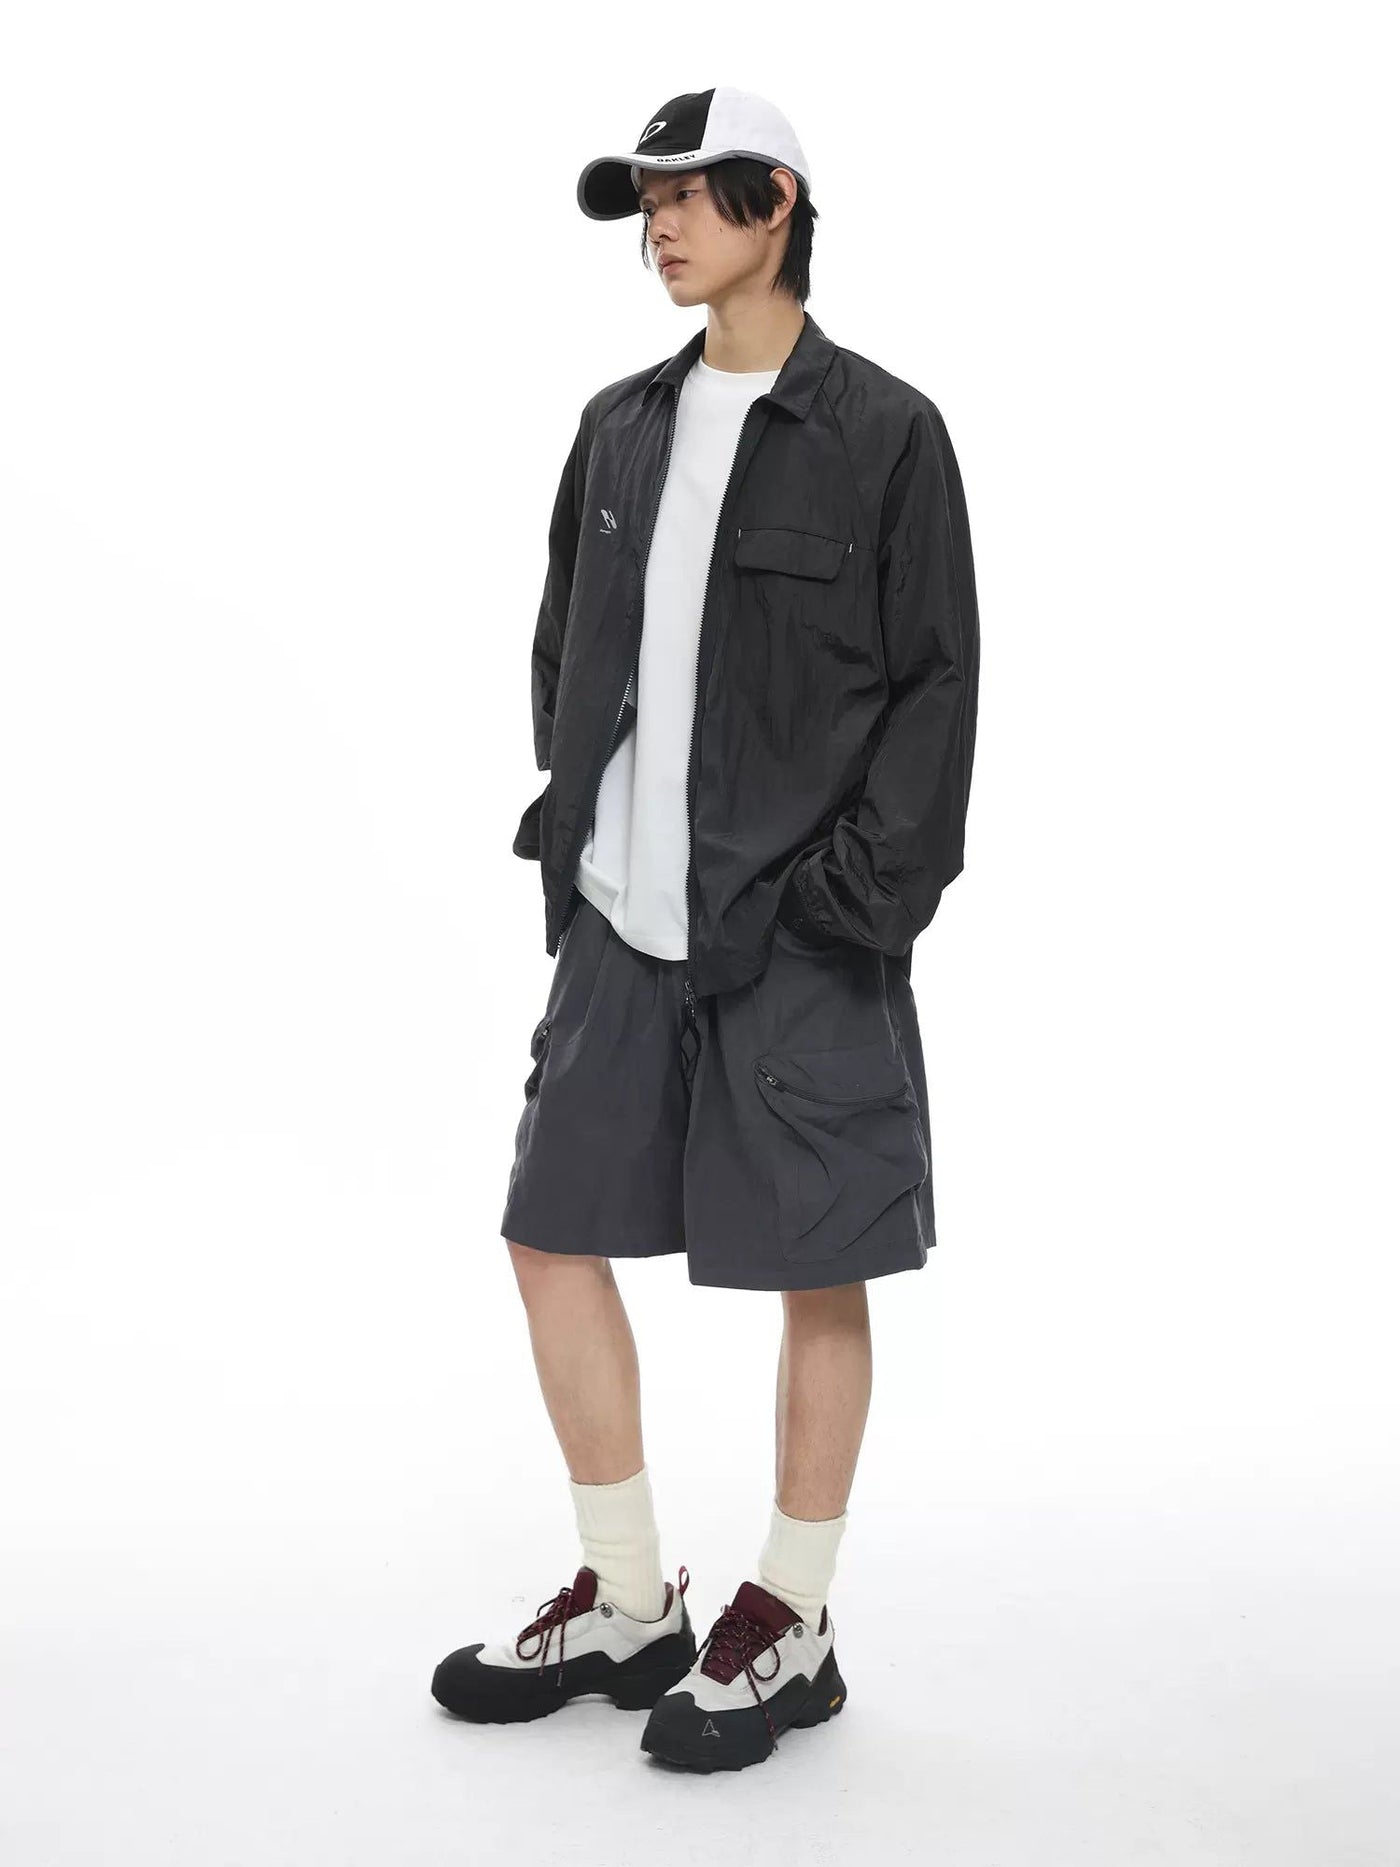 Quick Dry Zipped Pocket Shorts Korean Street Fashion Shorts By Roaring Wild Shop Online at OH Vault